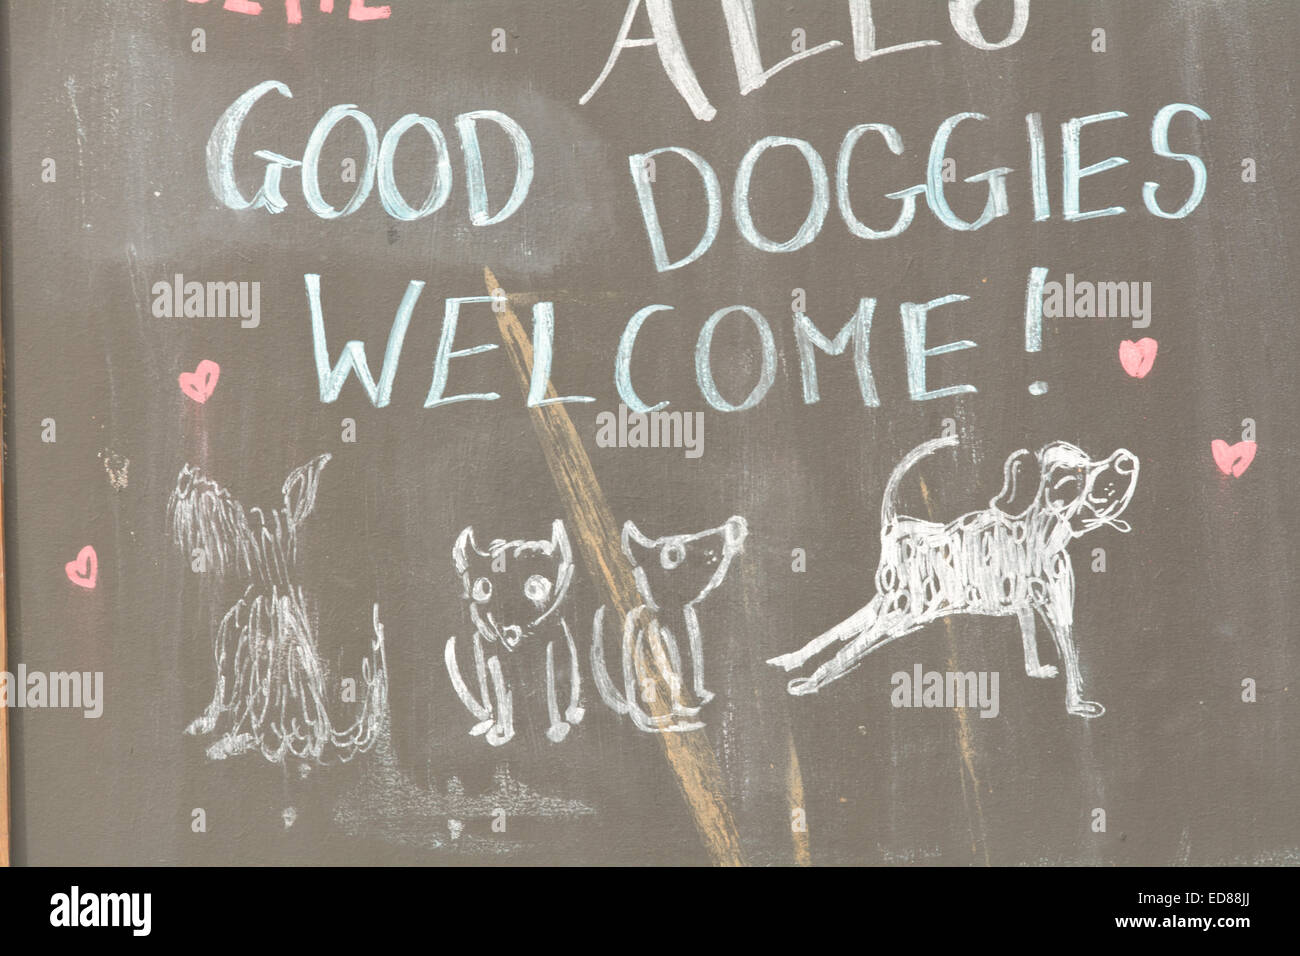 Good doggies welcome in cafe sign at Mousehole, Cornwall, England Stock Photo